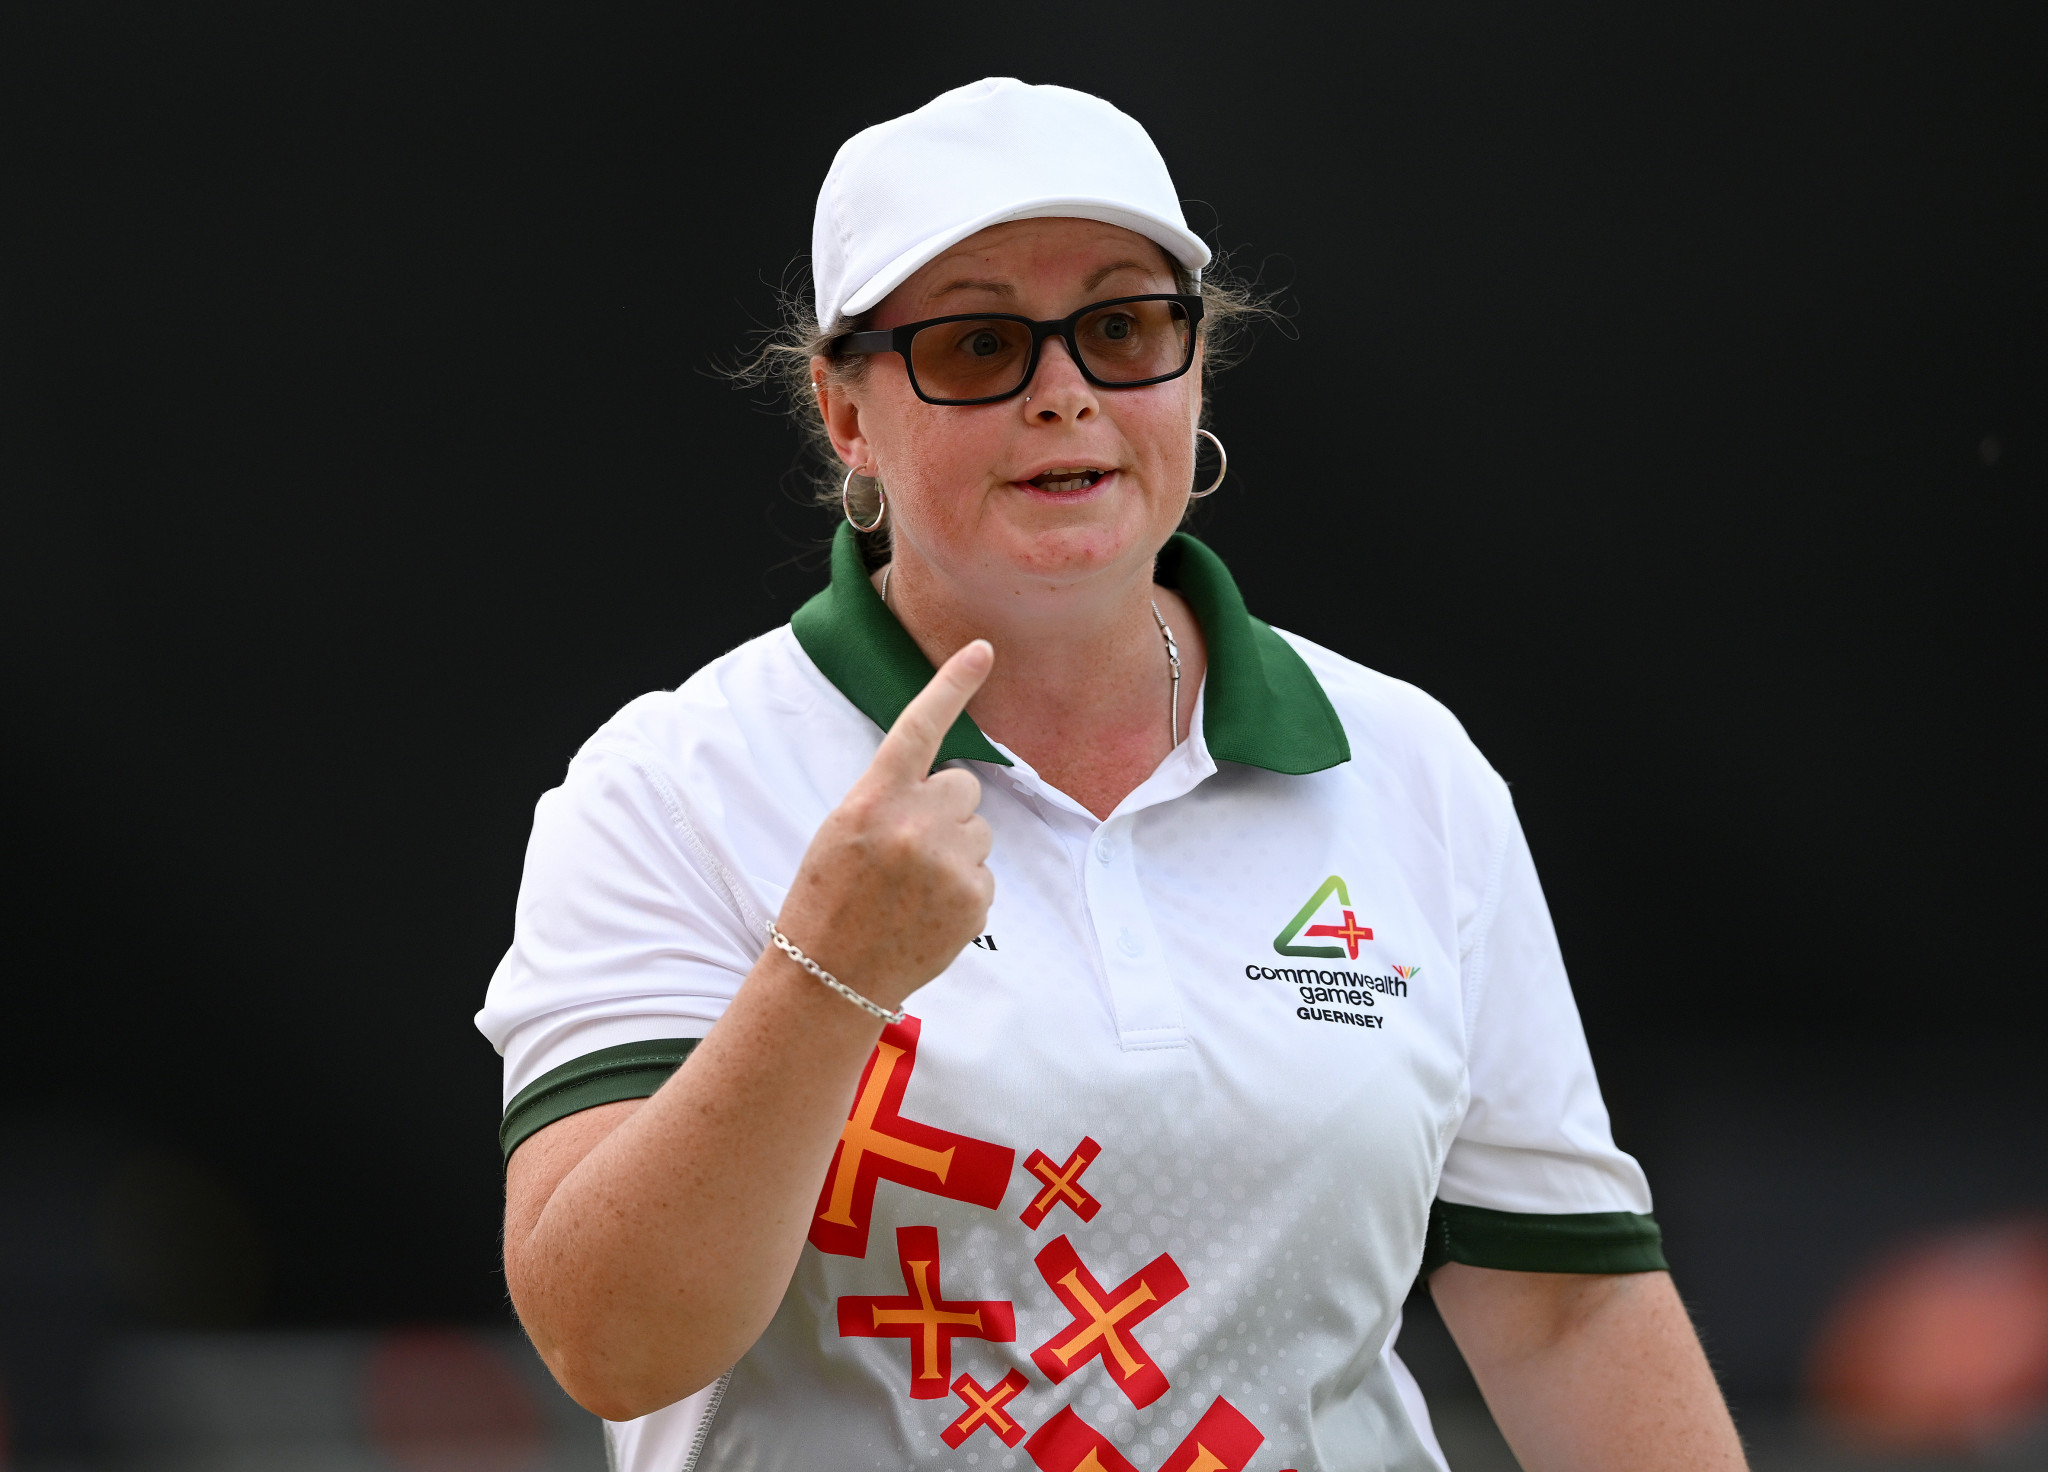 Bowler Lucy Beere won Guernsey's first Commonwealth Games medal since 1994 ©Getty Images